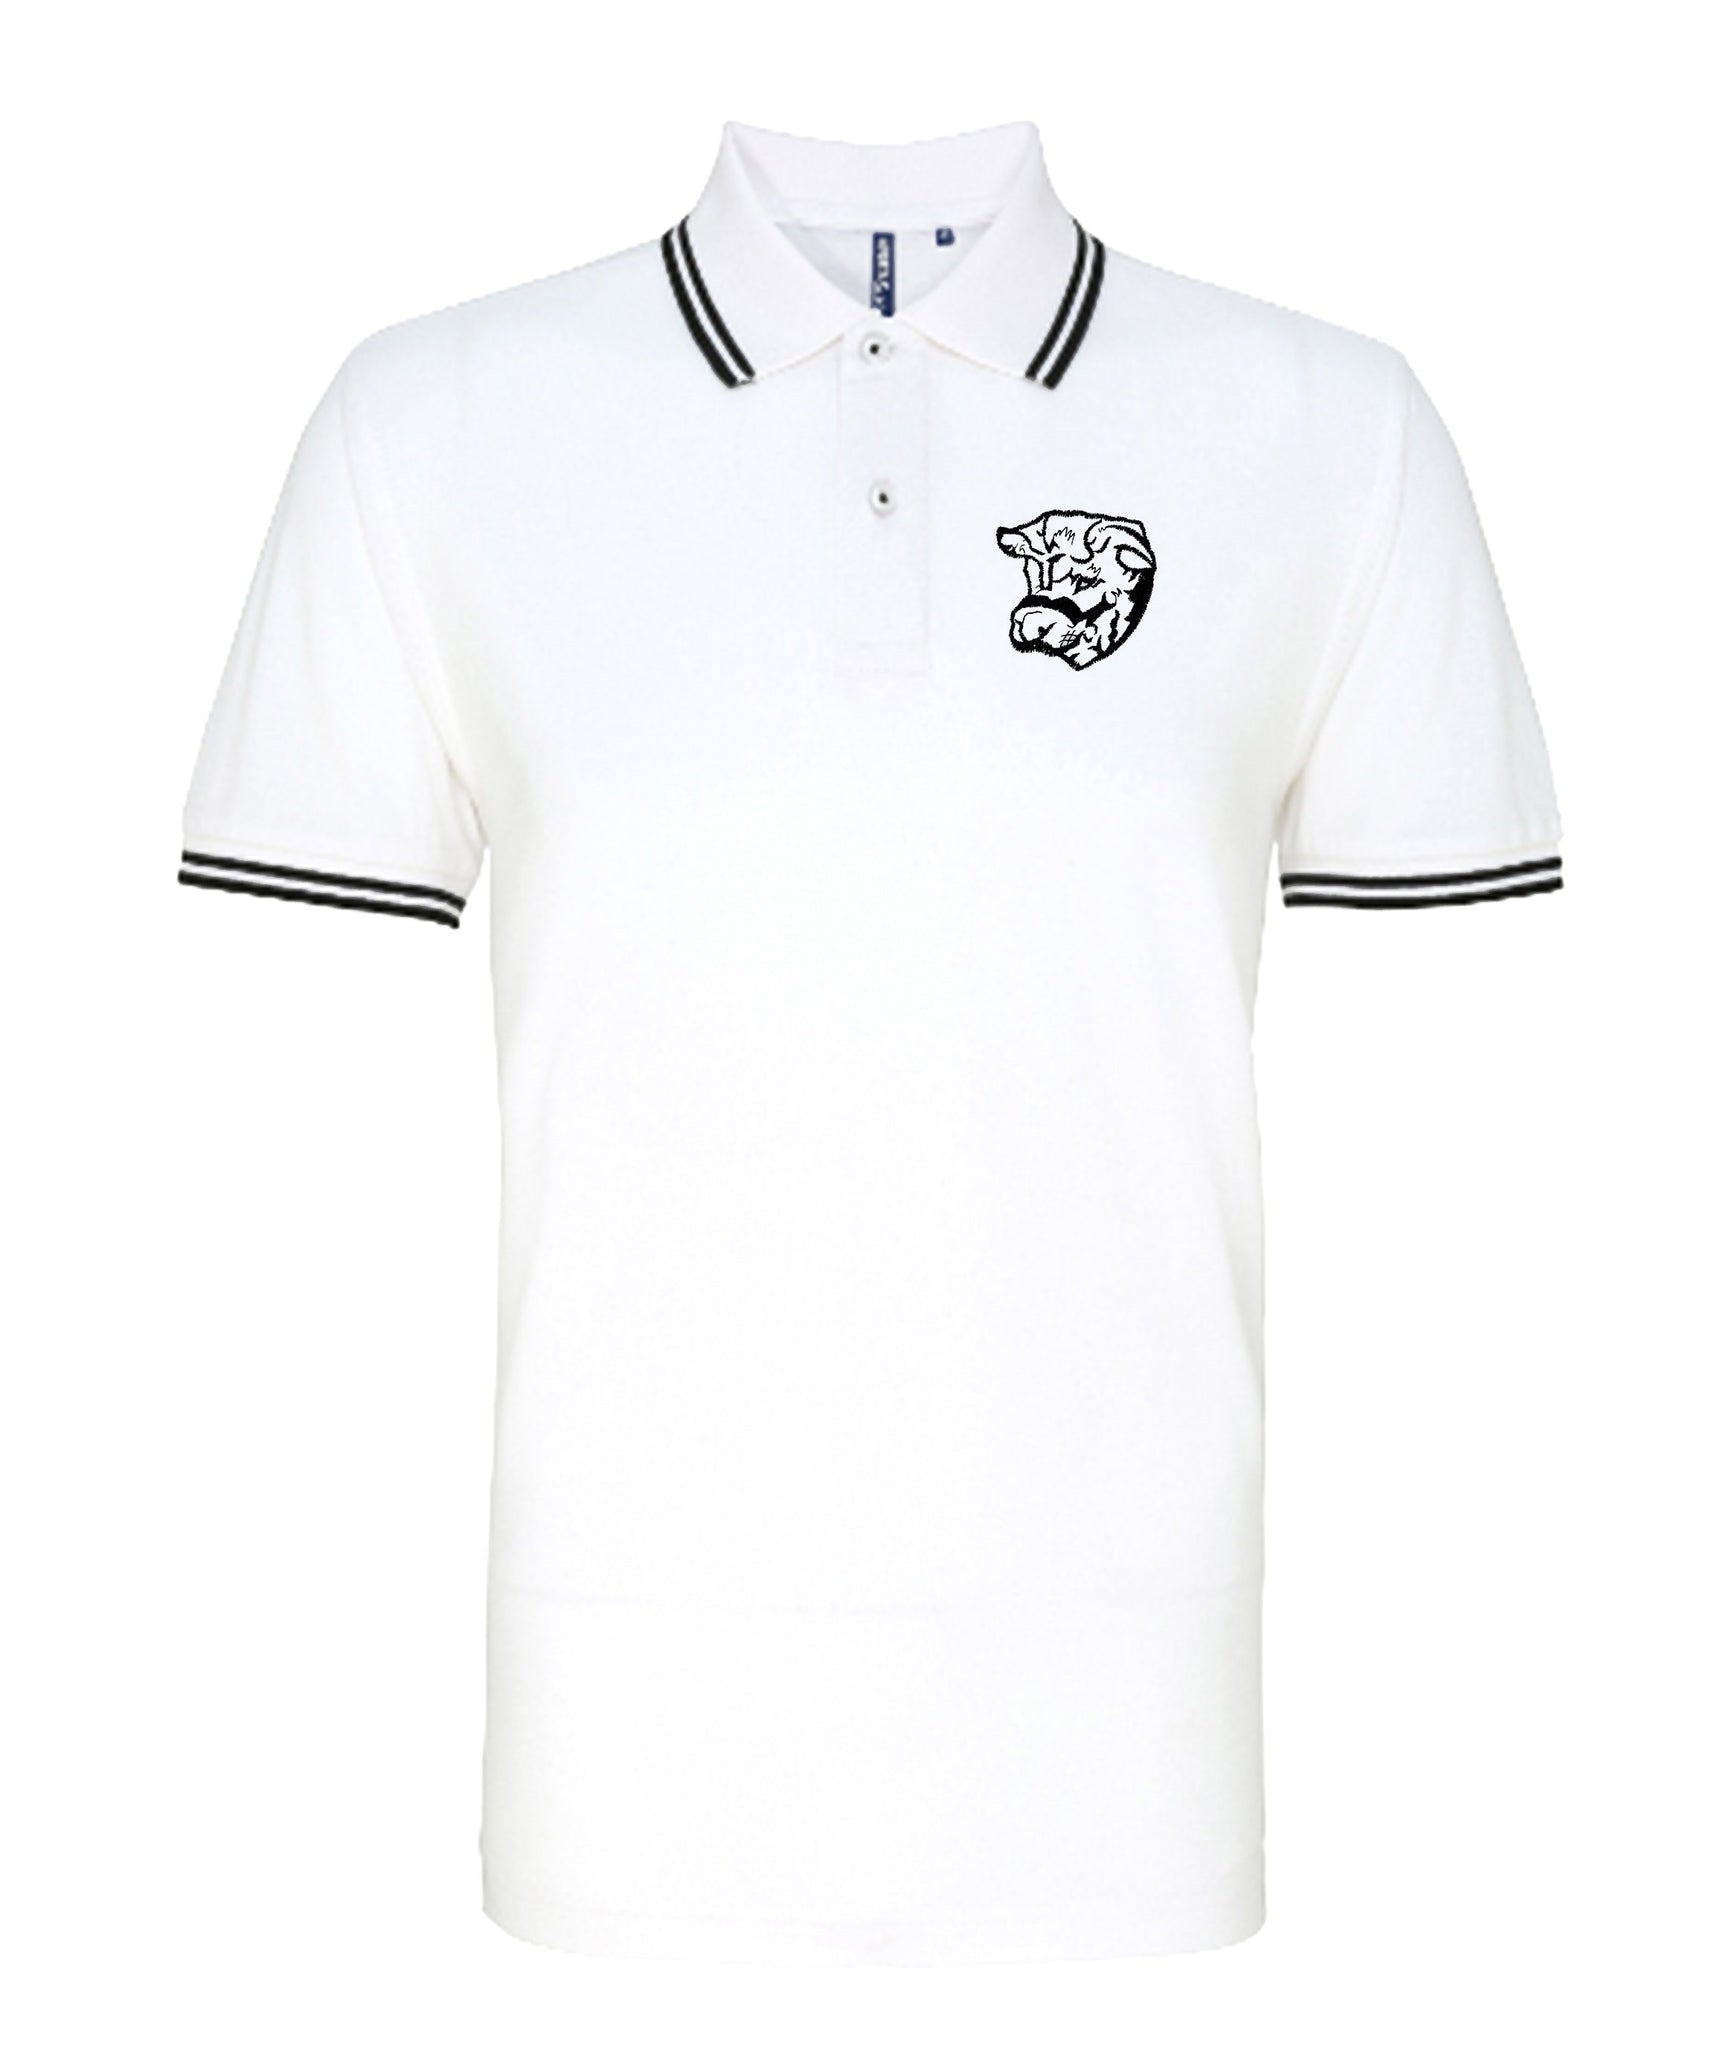 Hereford United Retro Football Iconic Polo 1960s - Polo